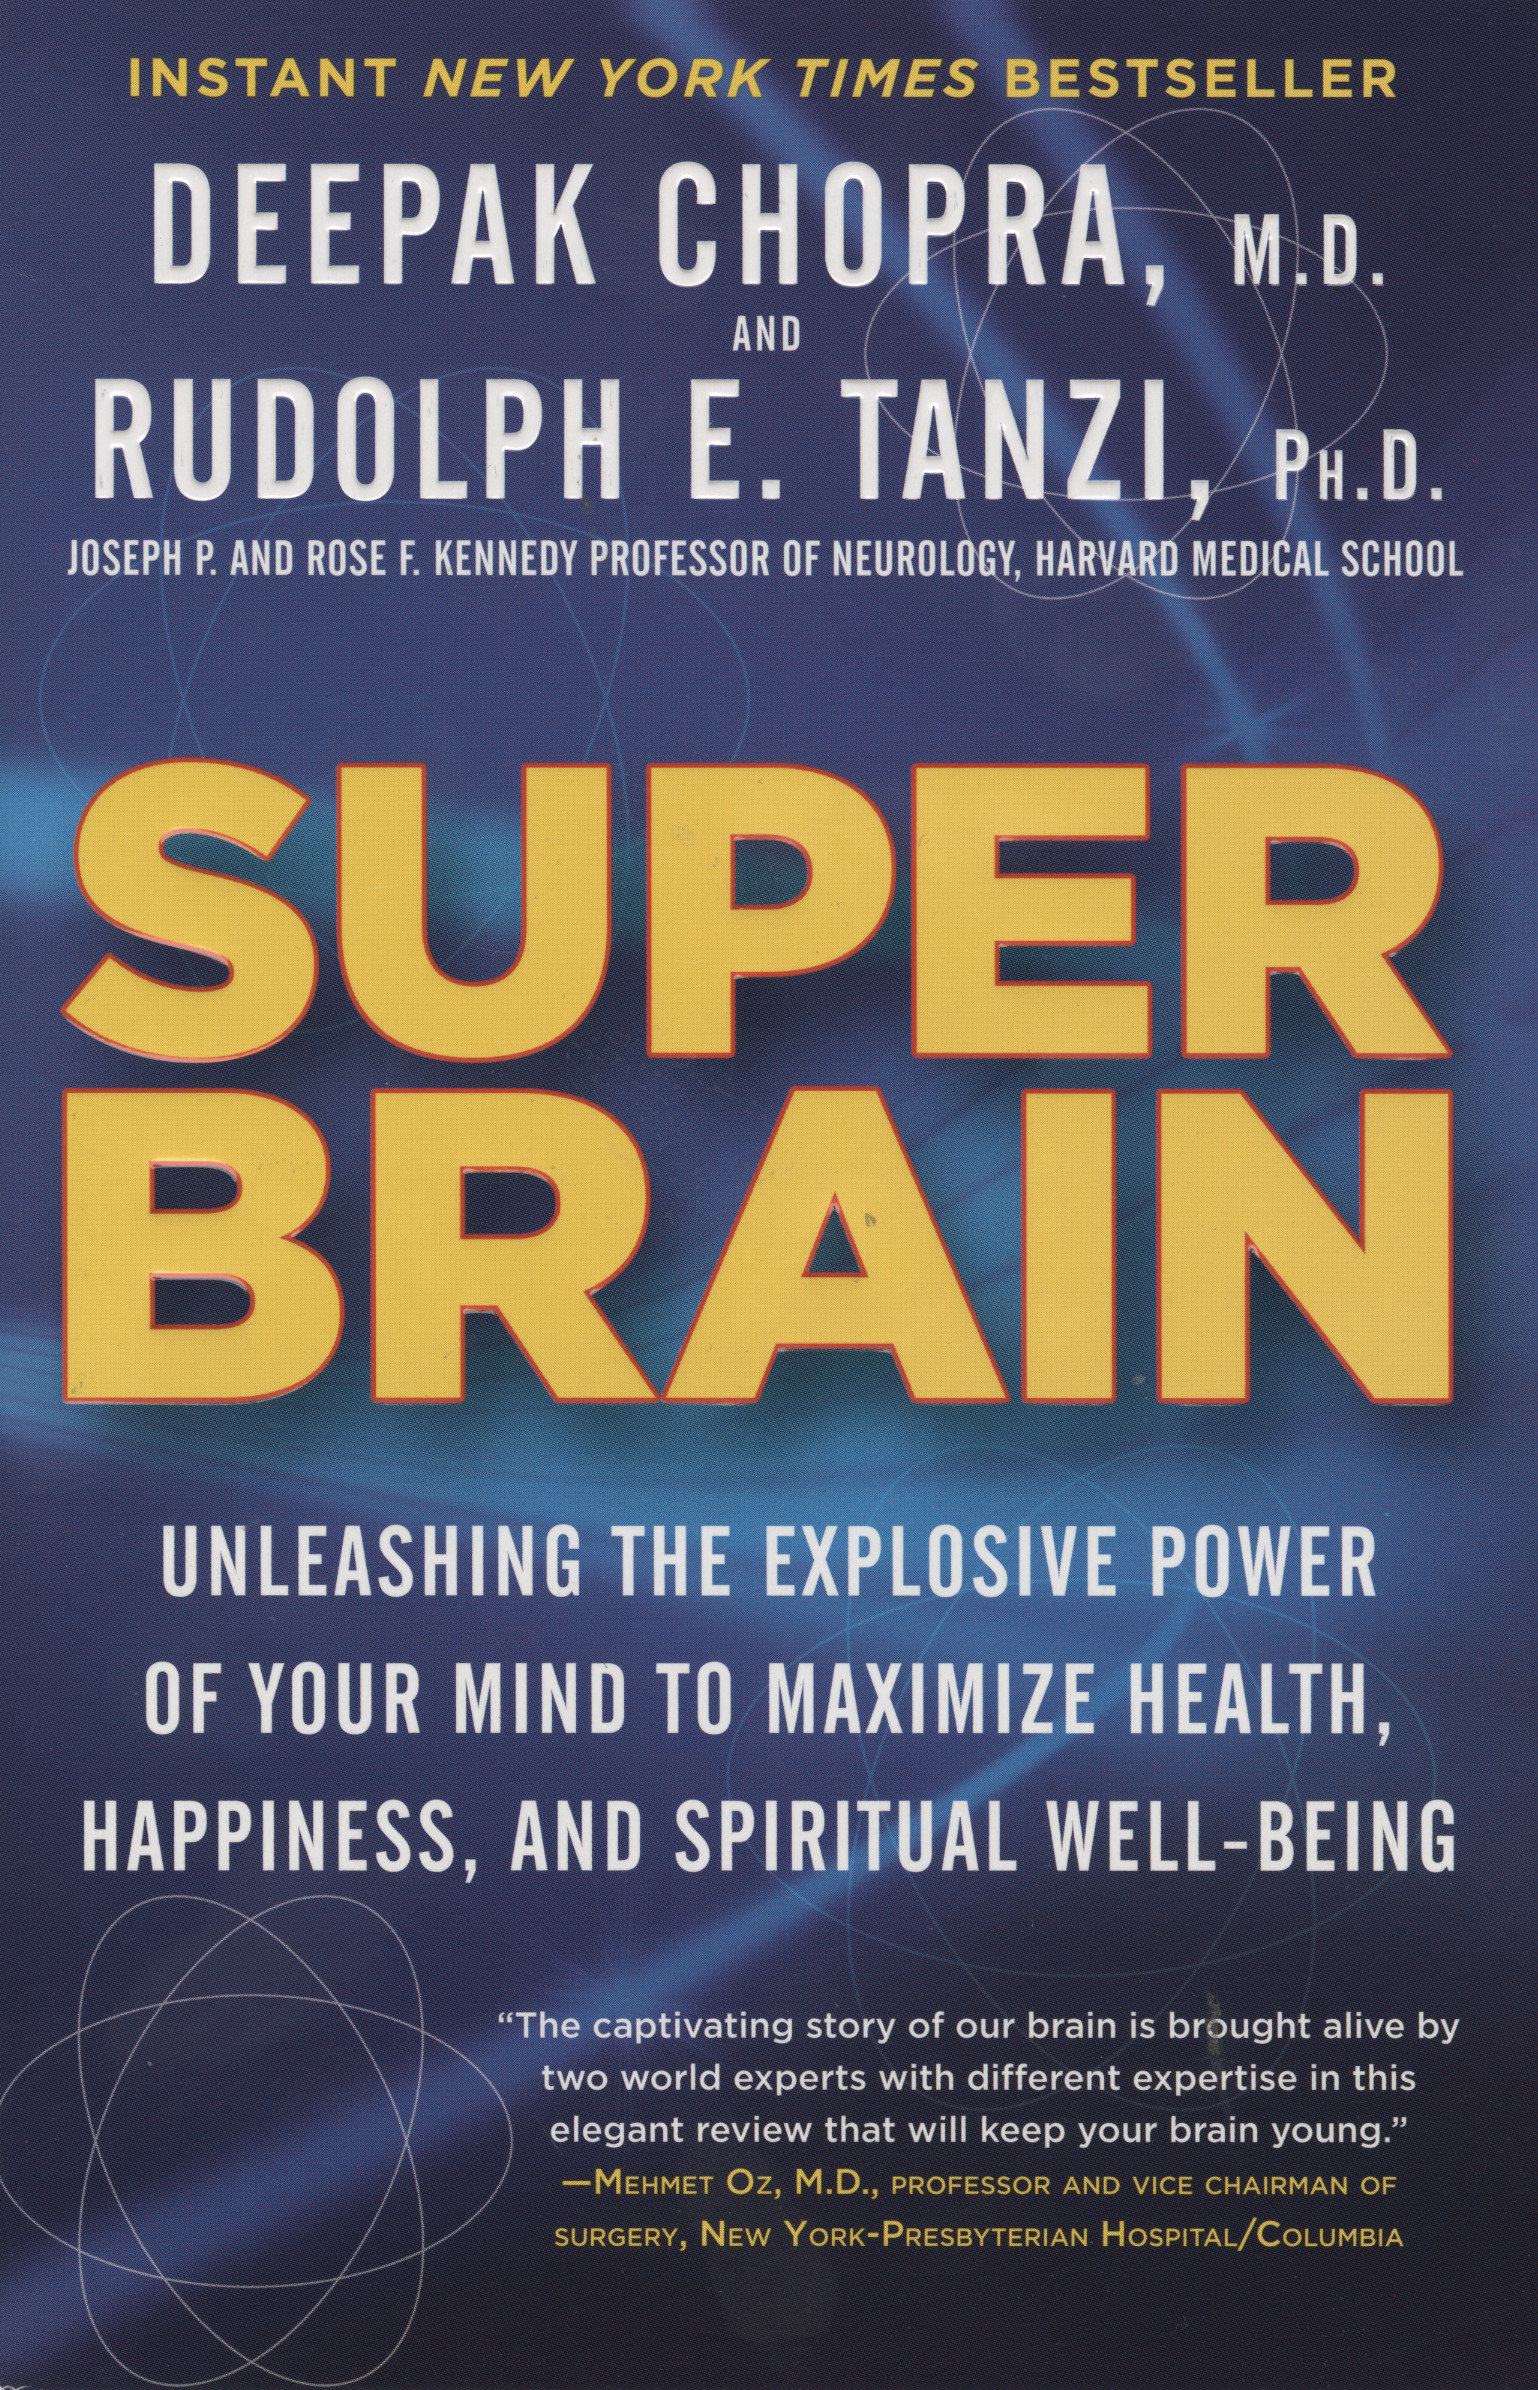 Super brain unleashing the explosive power of your mind to maximize health, happiness, and spiritual Well-Being cover image